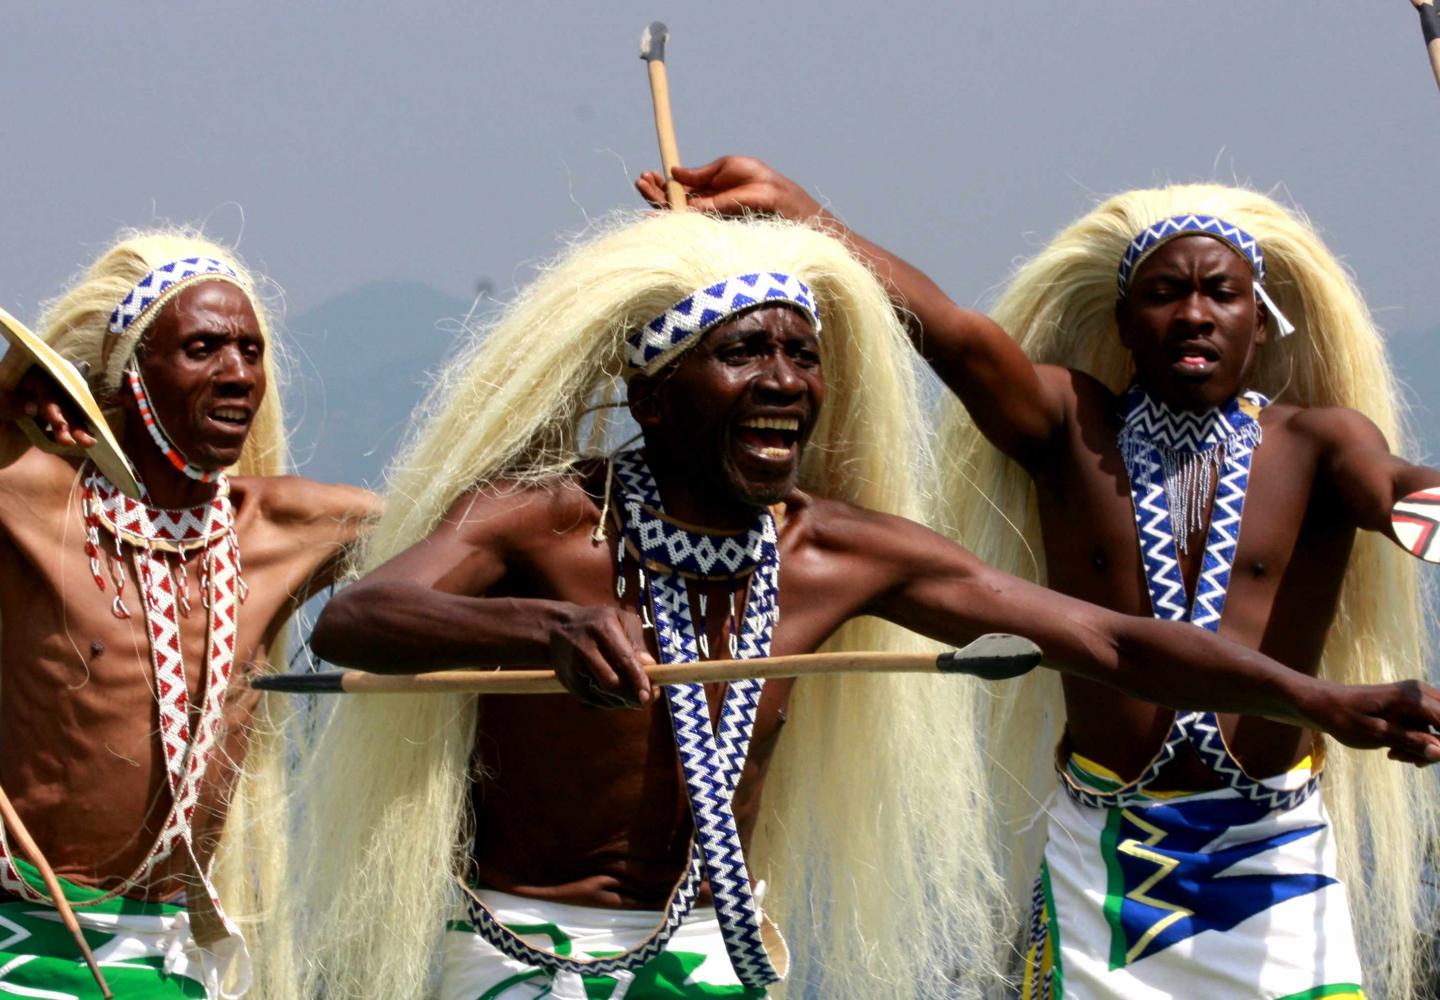 Performance Intore dancers with spear and traditional outfit (Rwanda)